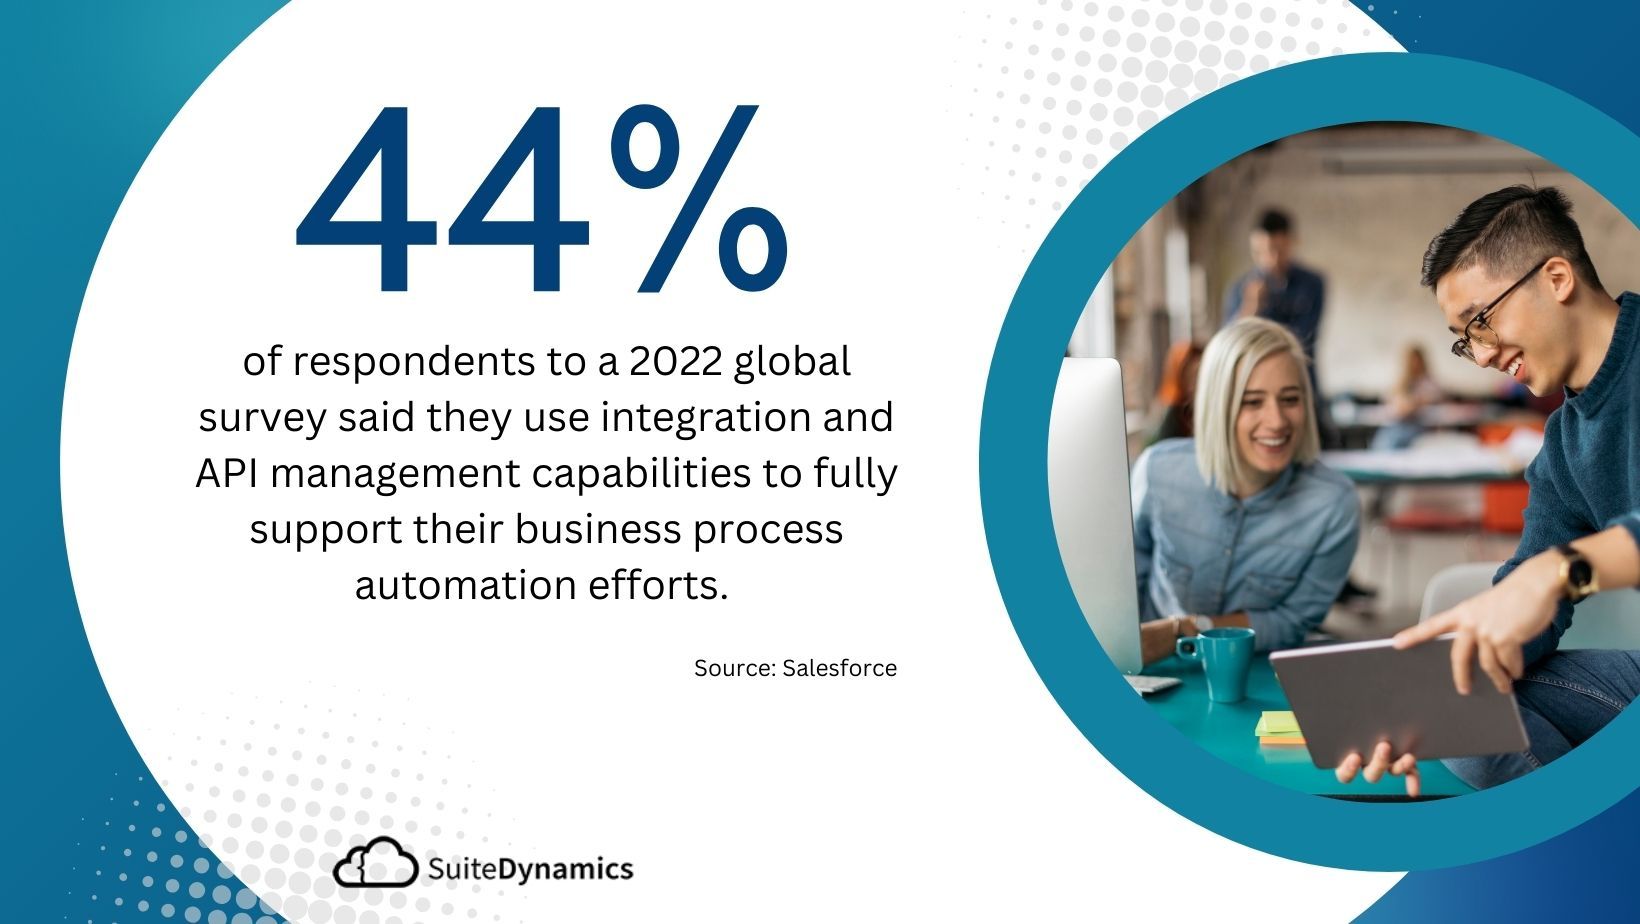 Graphic showing that 44% of 2022 survey respondents said they use integration and API management capabilities to fully support their business process and automation efforts.